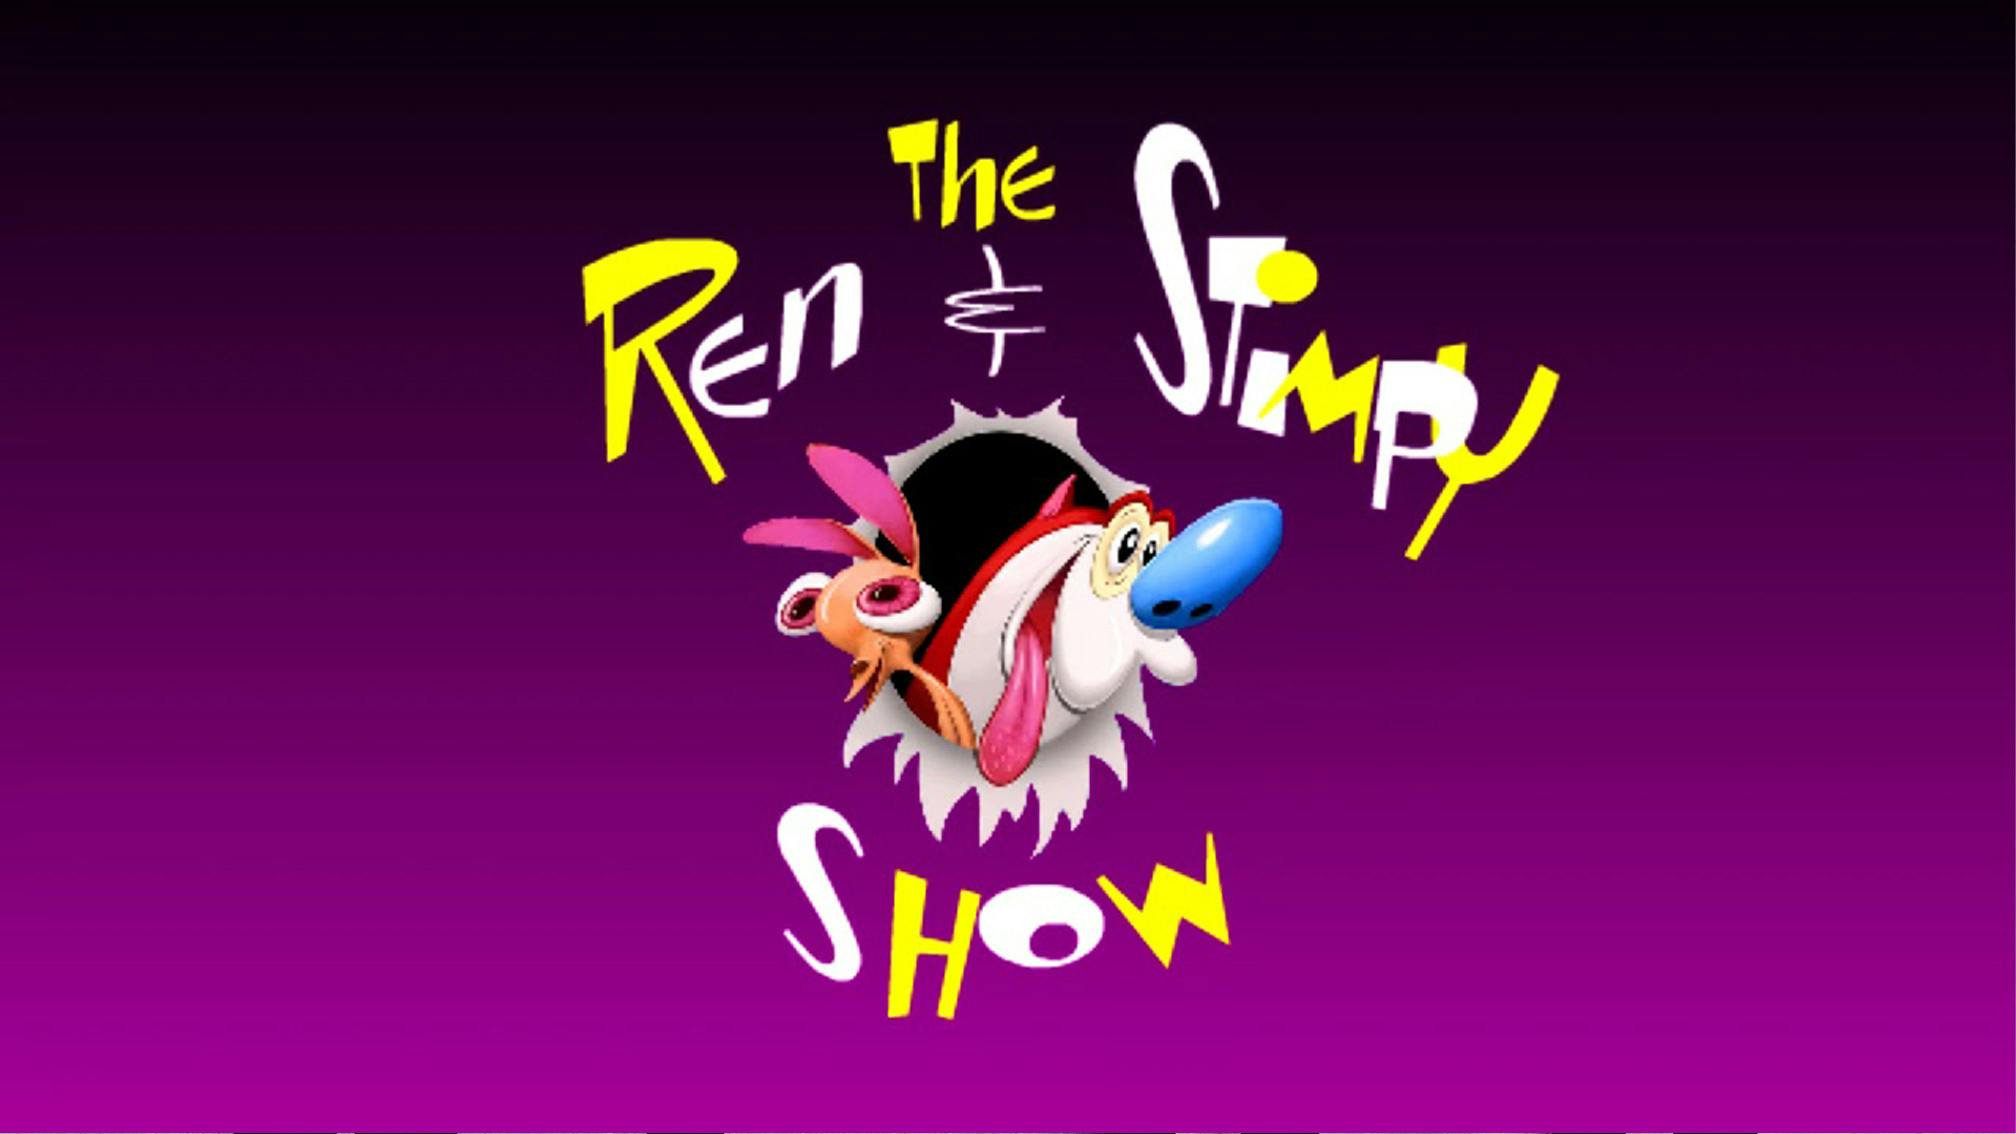 Comedy Central Confirms Reimagined The Ren & Stimpy Show